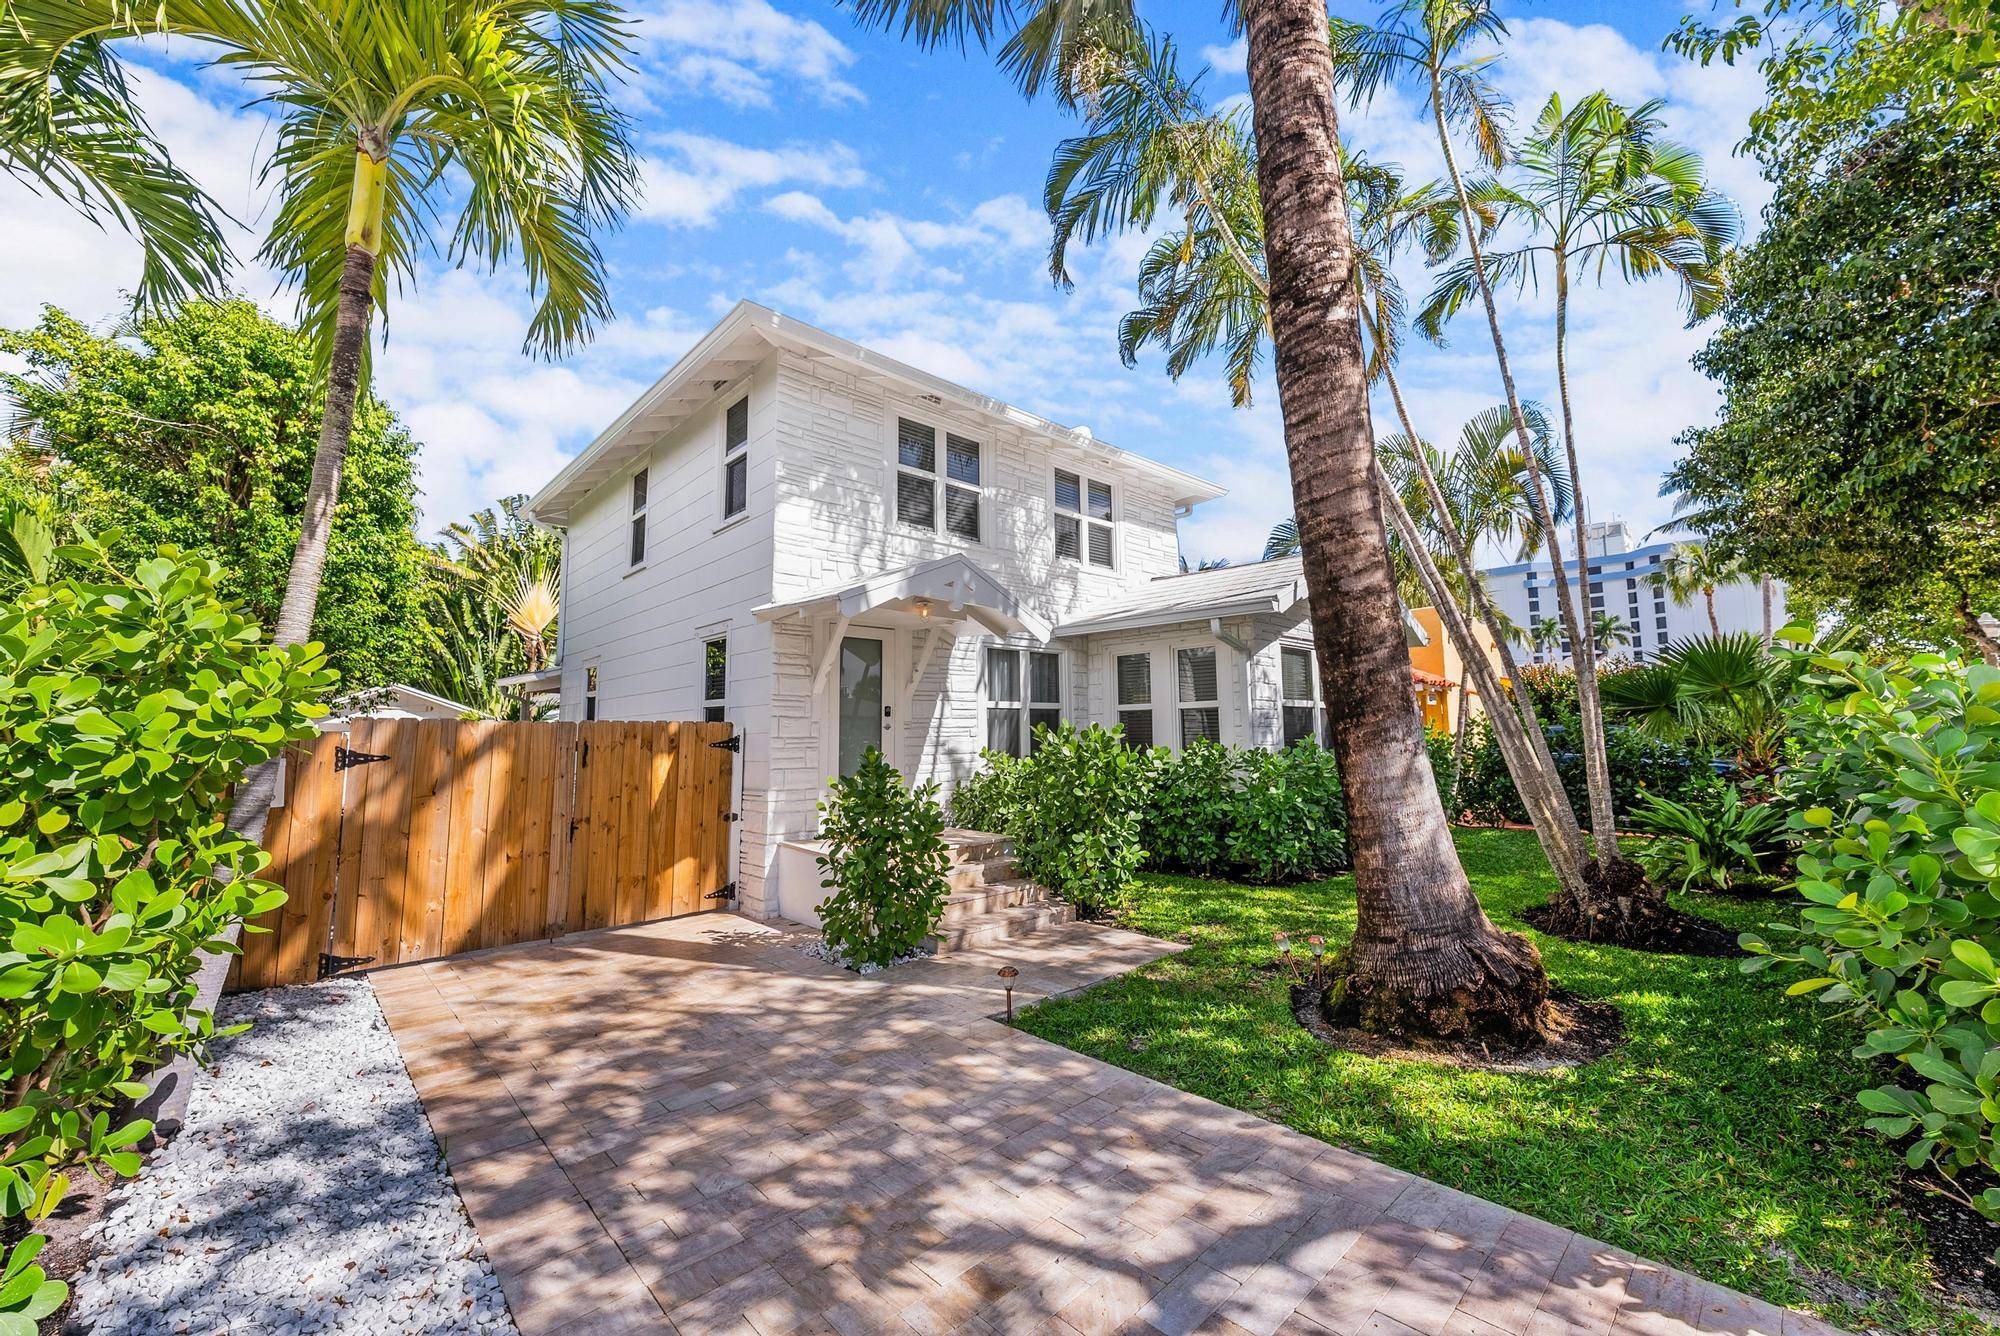 Incredibly Charming 2 Story Home One block from the Intracoastal Waterway in the Central Park Historic District of coastal Wpb.